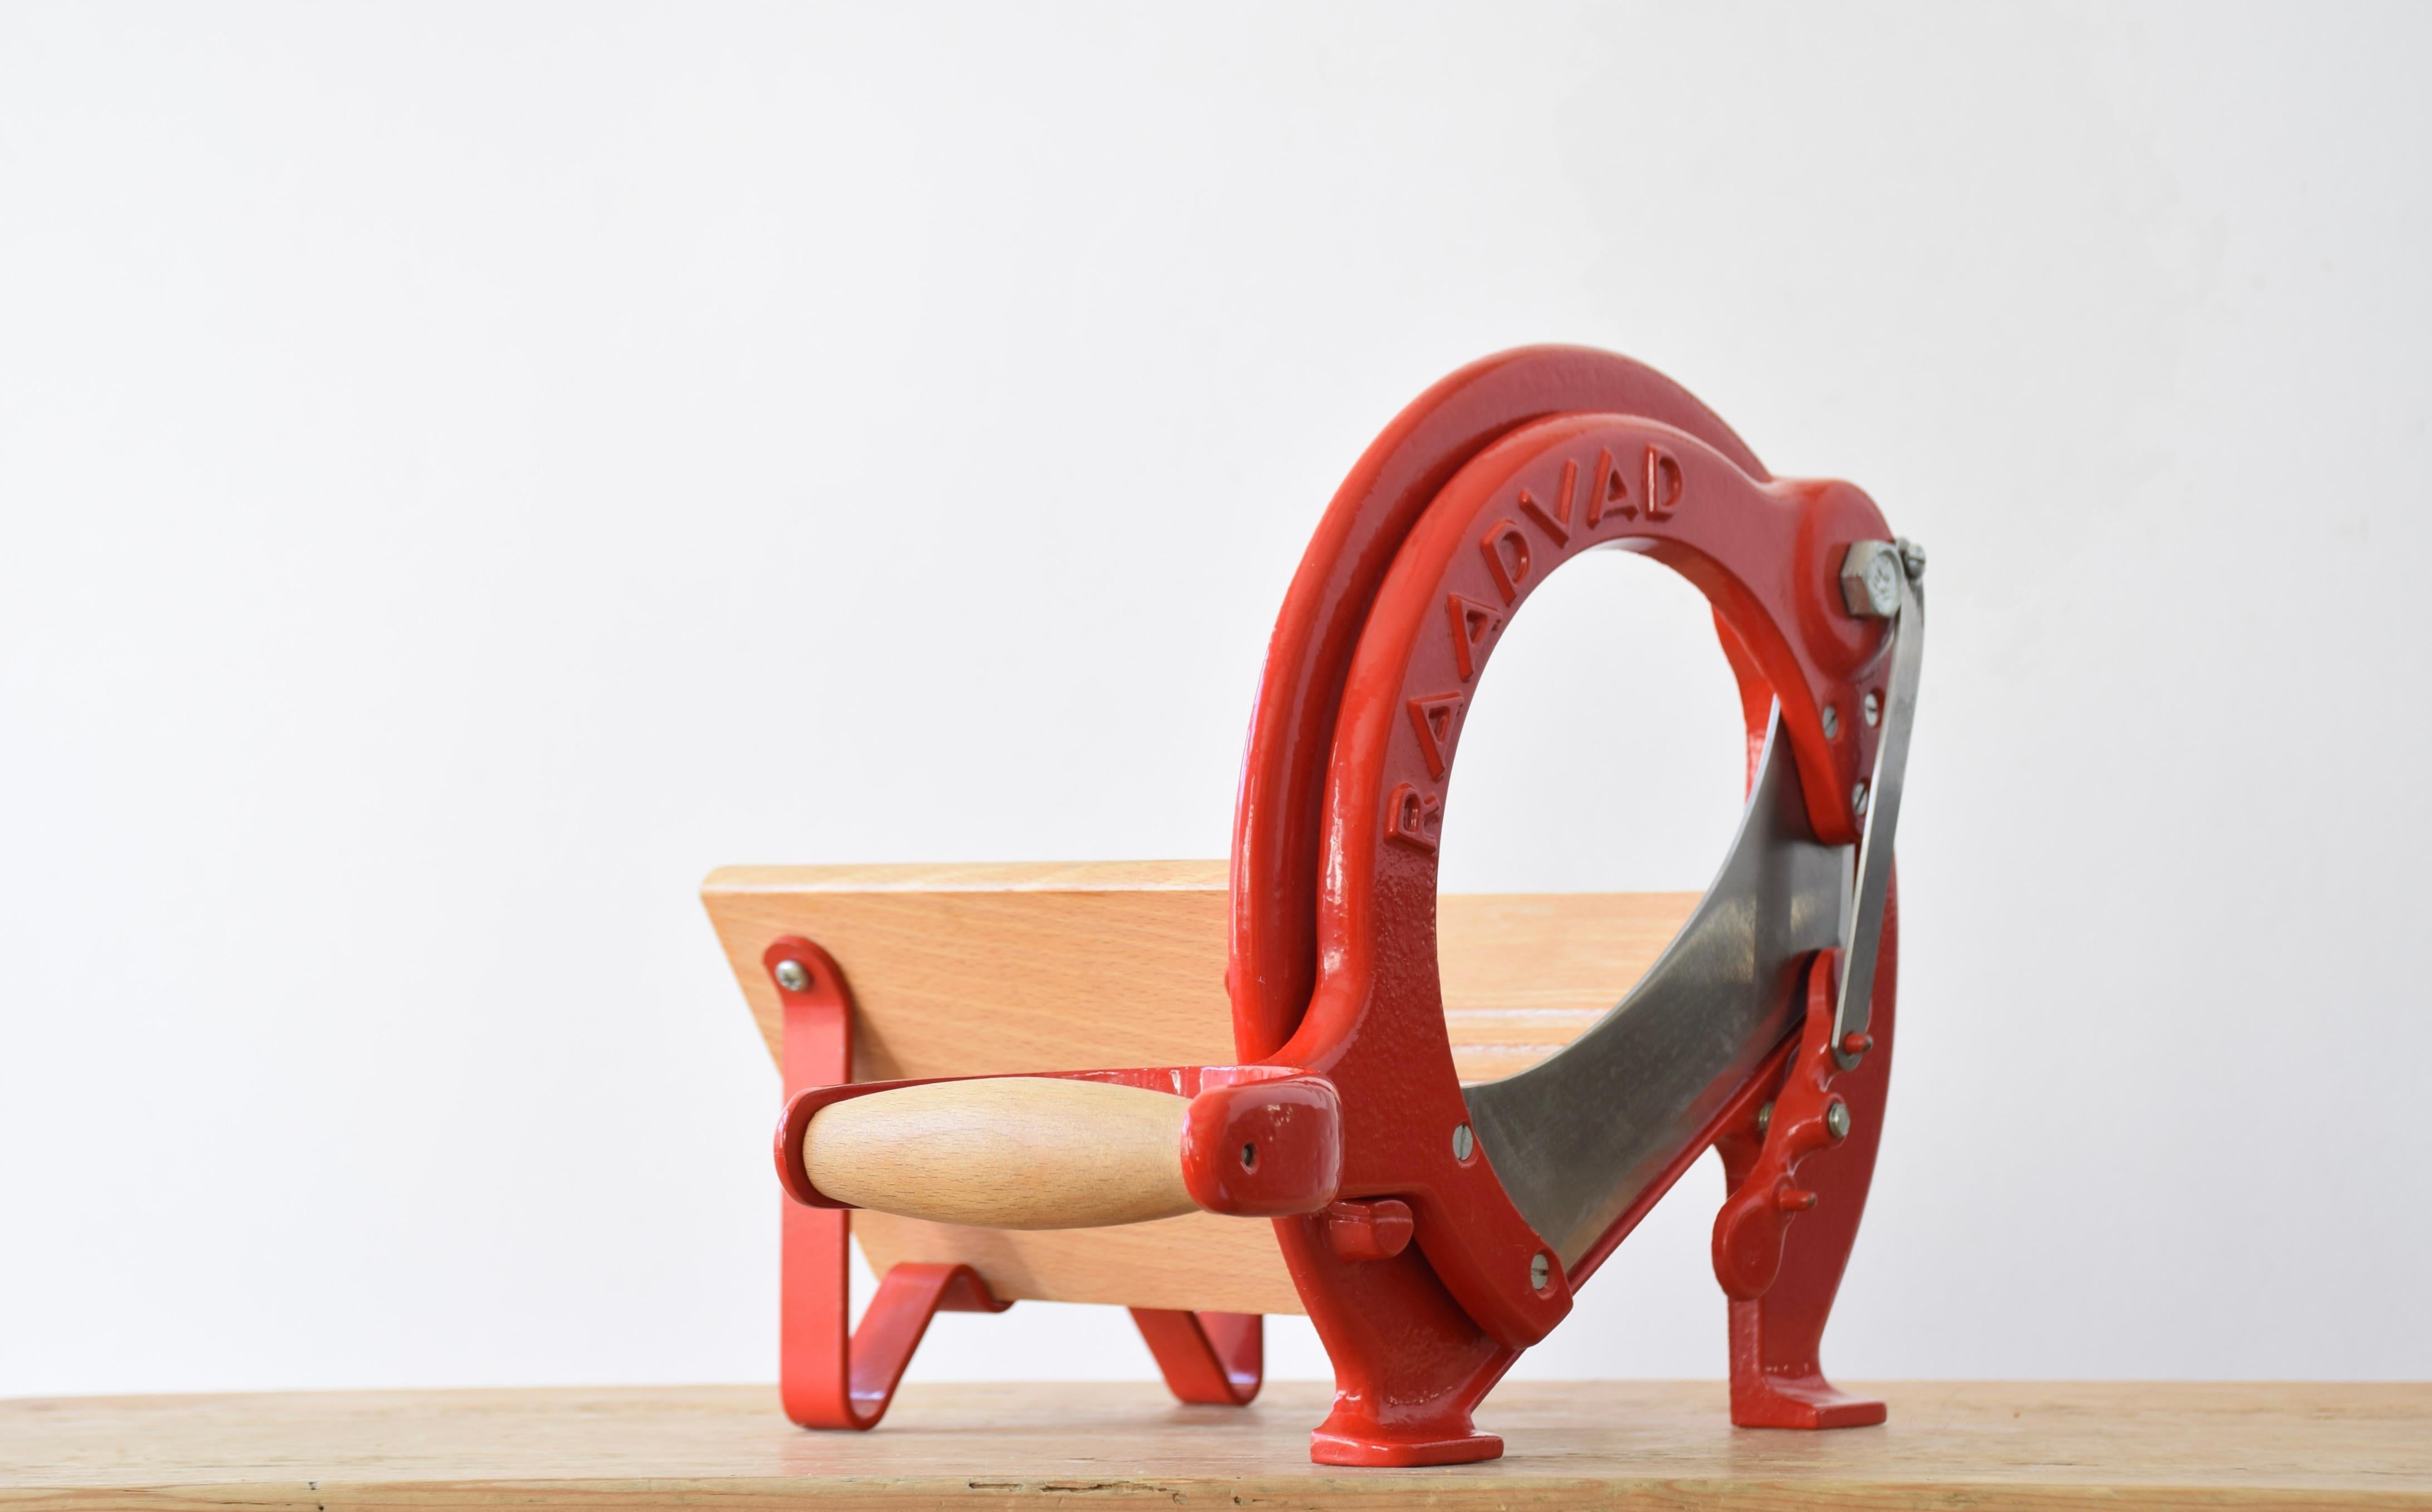 This iconic Danish bread slicer was produced by Raadvad in Denmark, circa 1970s-1980s. It comes with the original red lacquer. The red version is more rare to find. The bread slicer is fully functional for slicing bread, especially black bread and